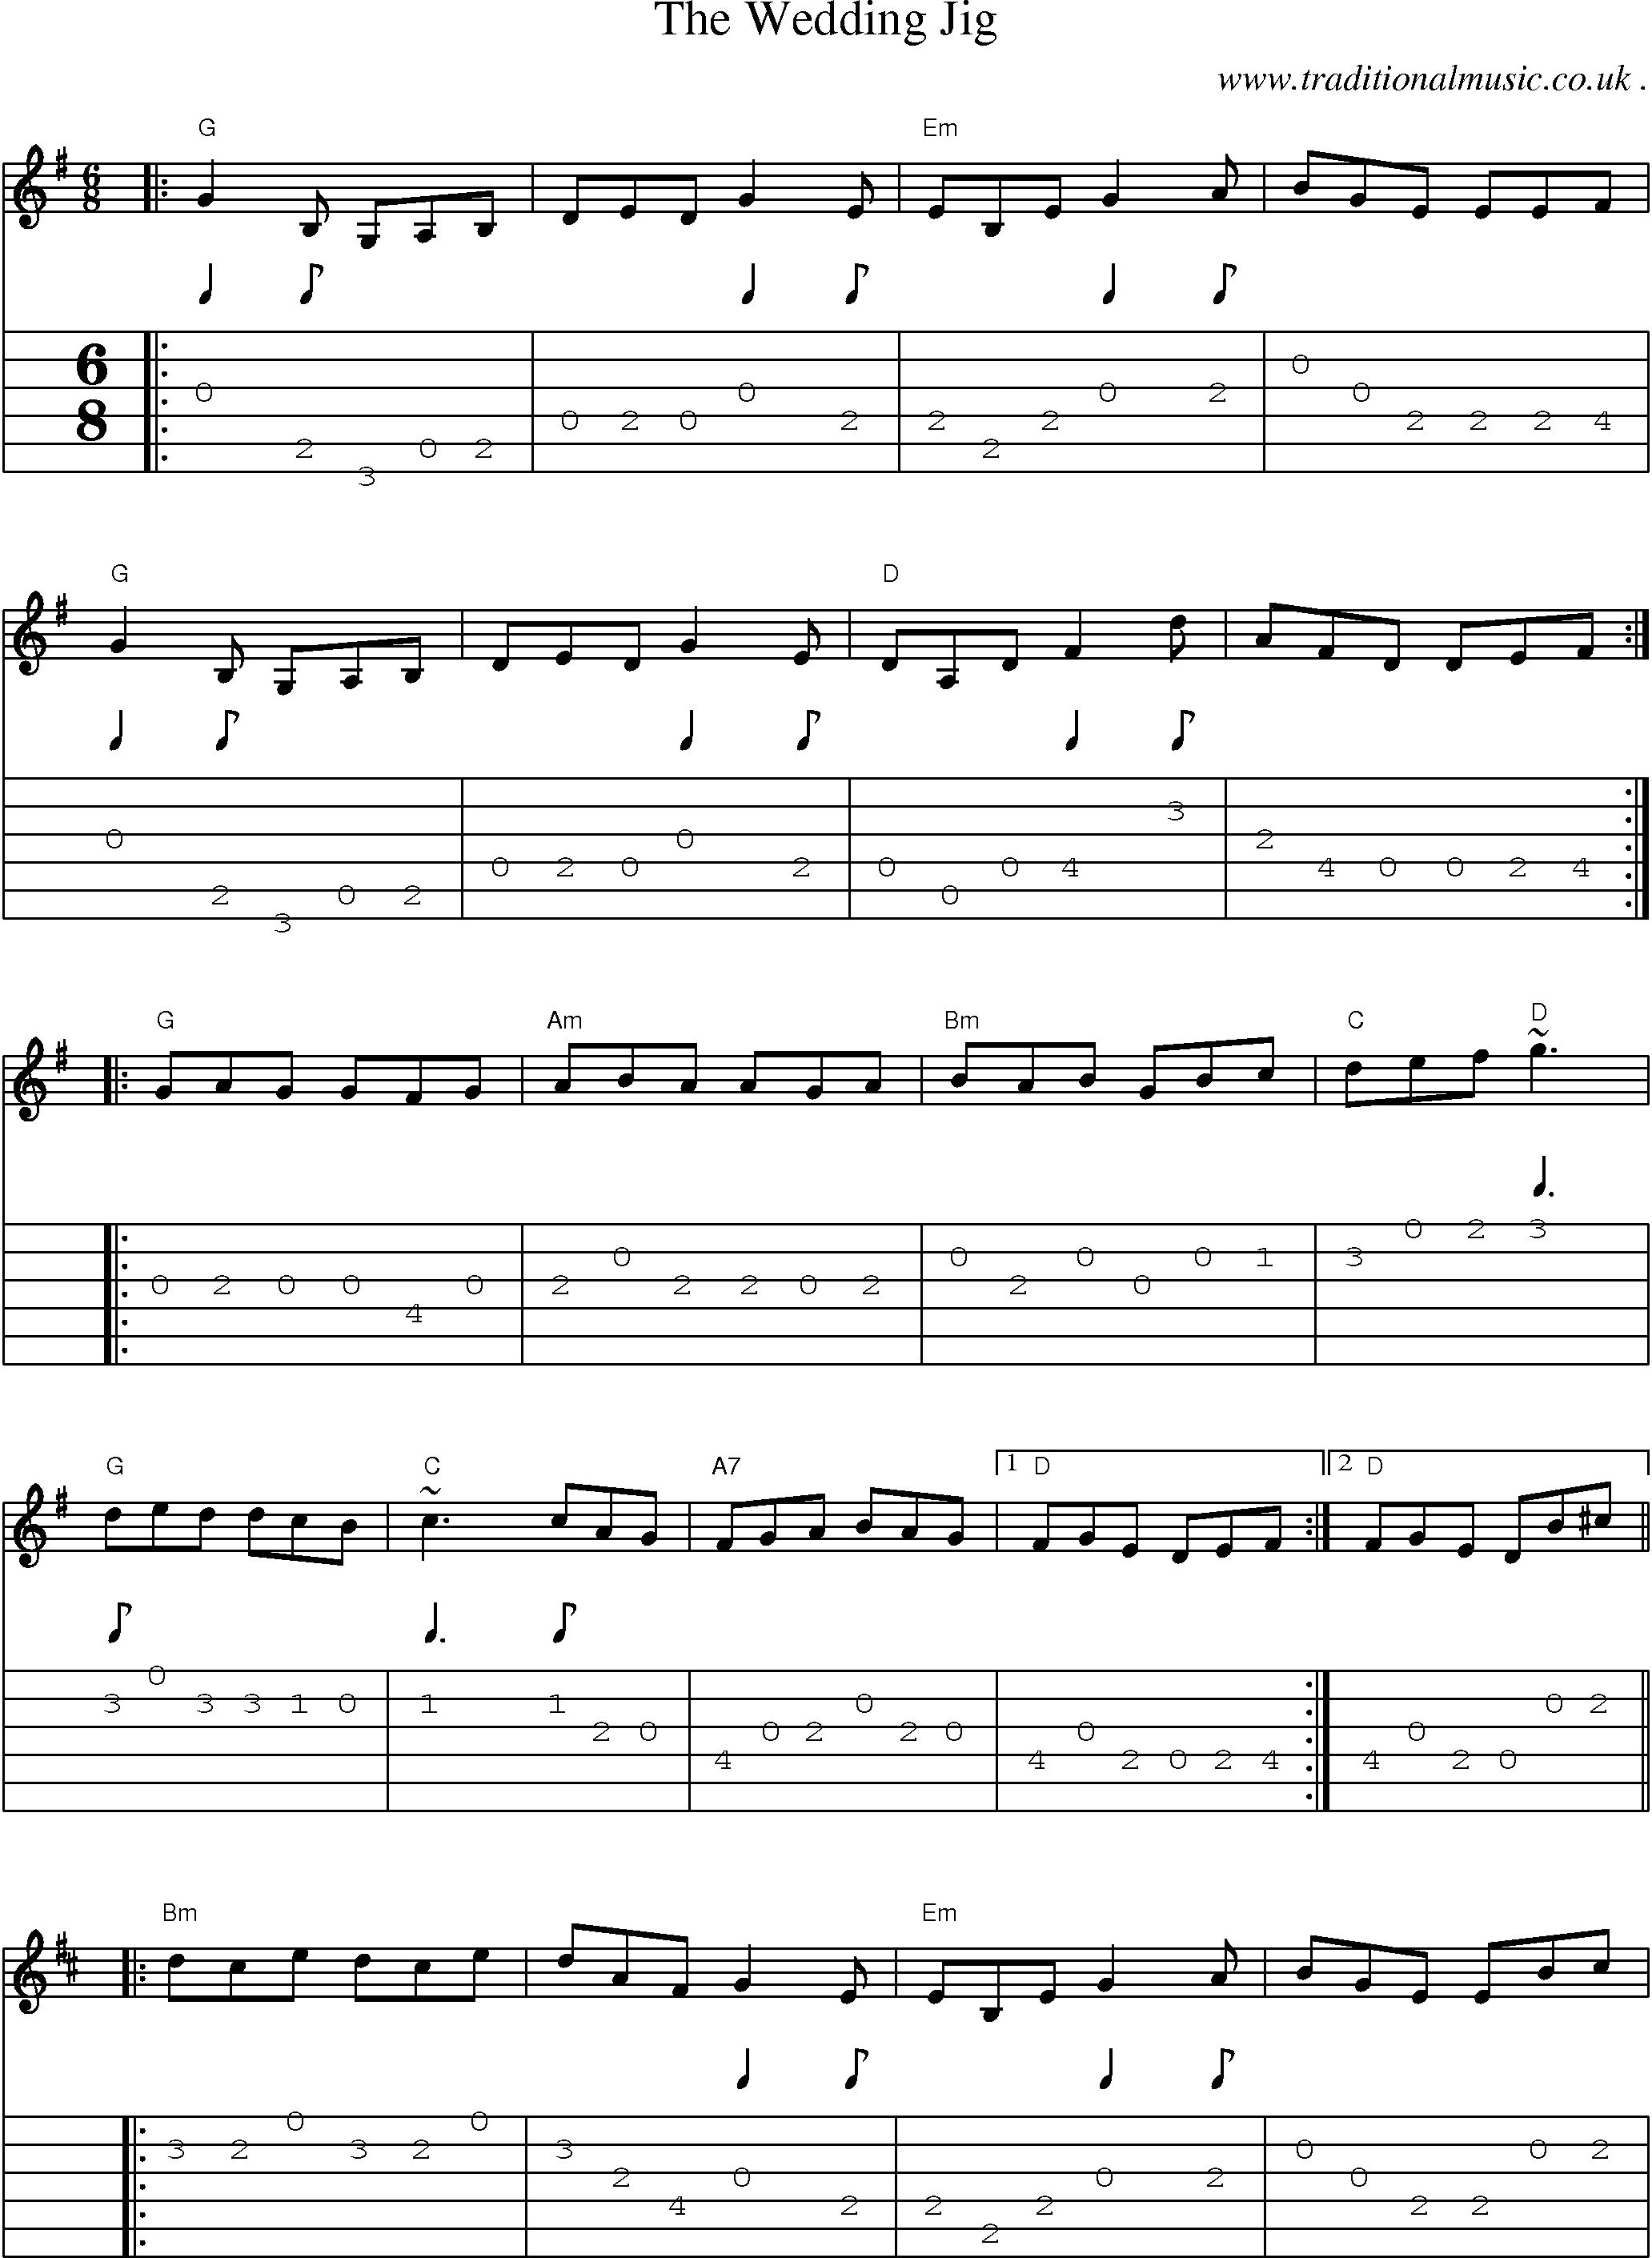 Music Score and Guitar Tabs for The Wedding Jig